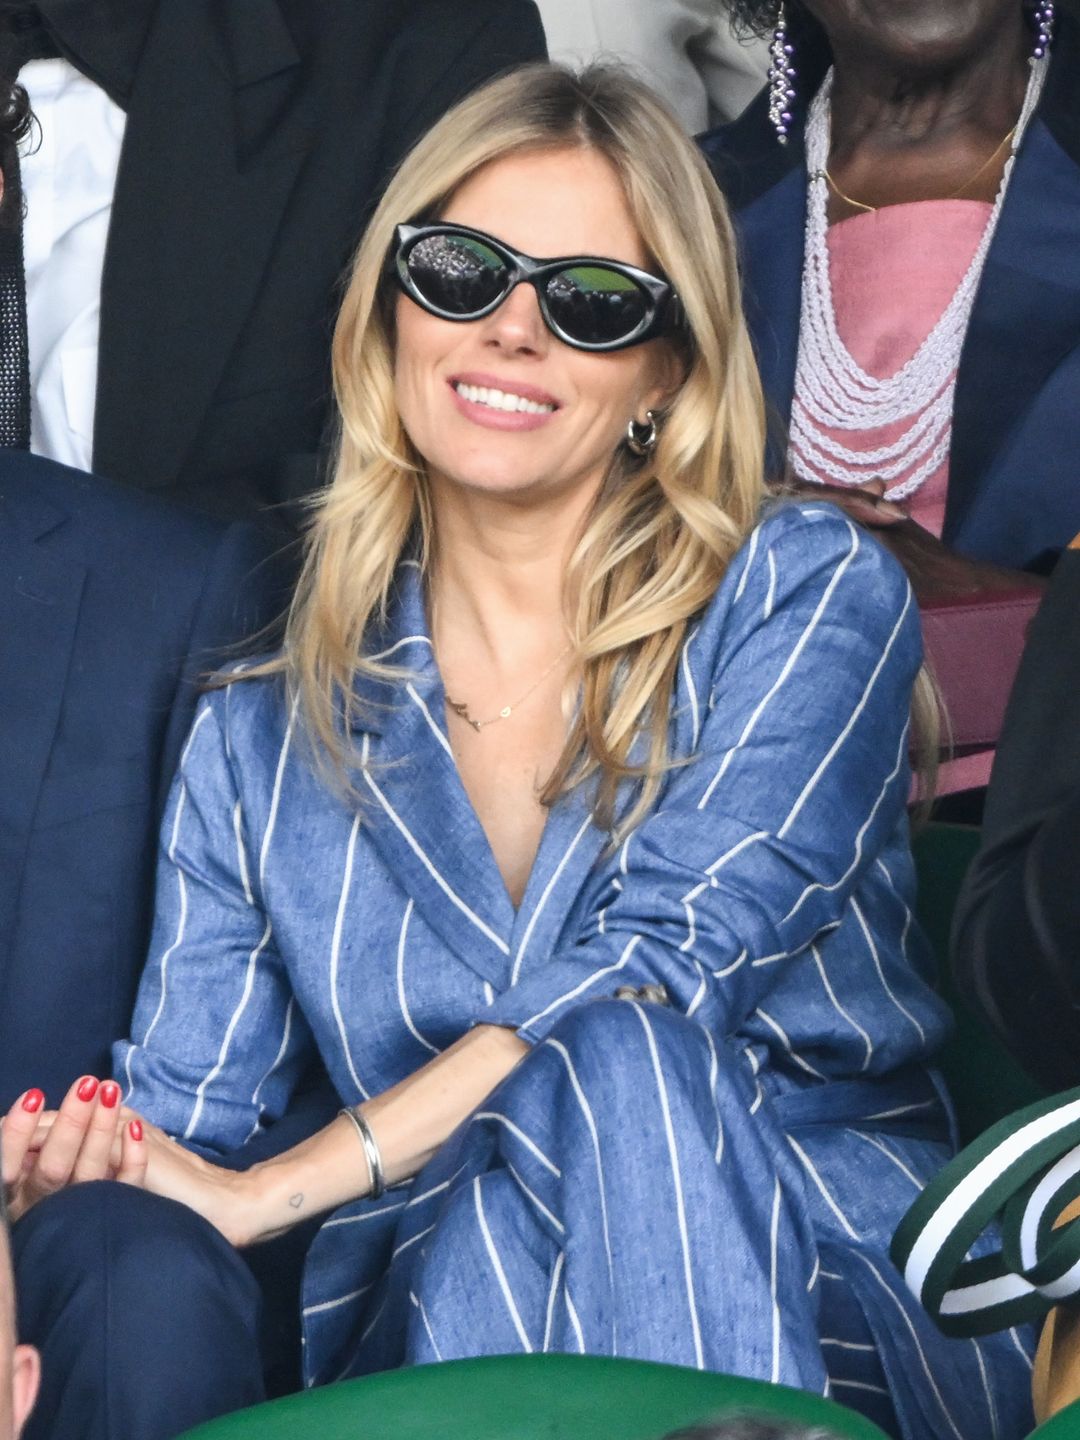 Sienna Miller attended day seven of the Wimbledon Tennis Championships in July wearing the earrings